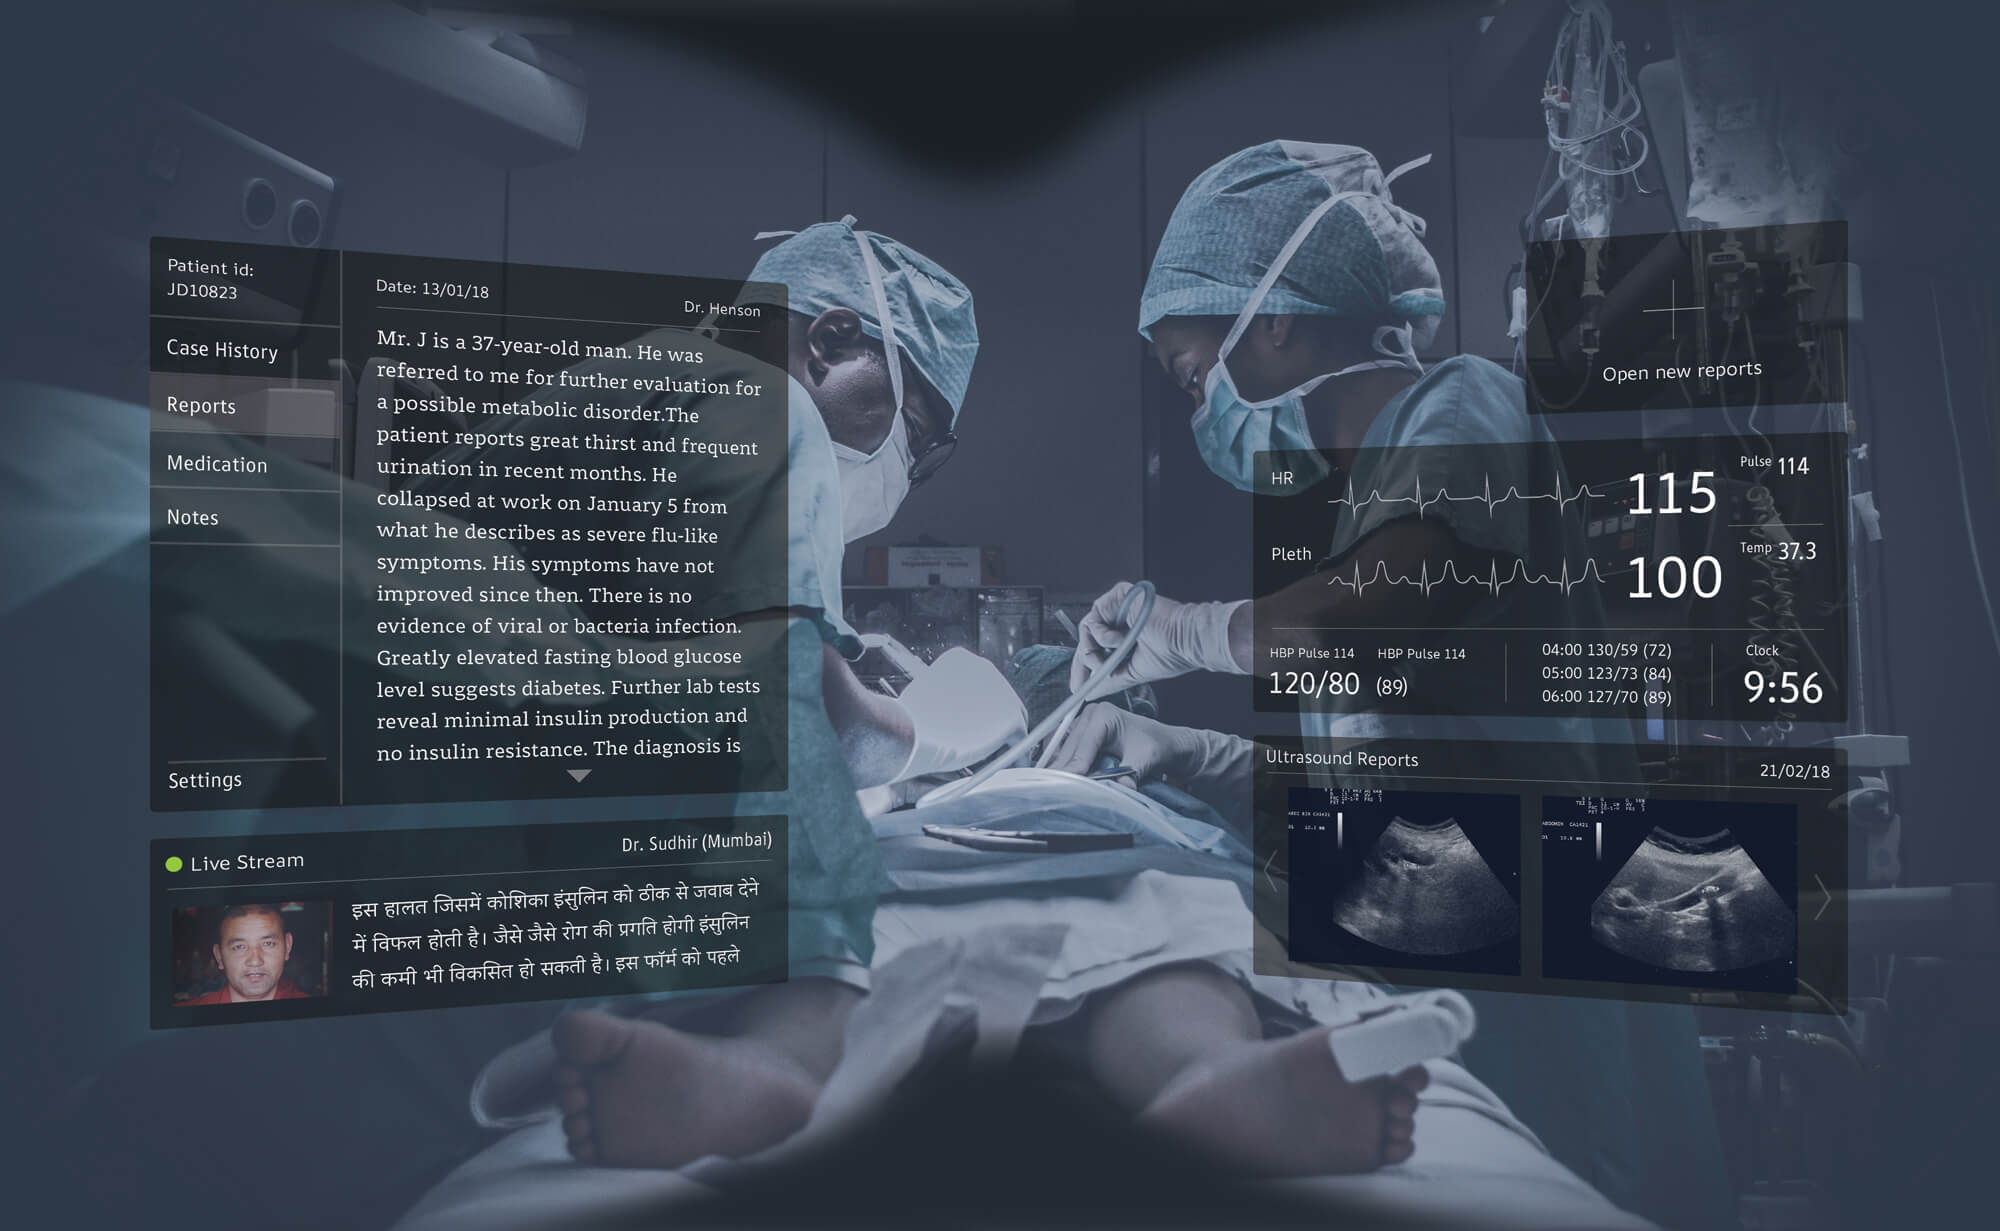 Representation of AR glasses being used in operation theatre and the typeface/ font used in interface is Aronerface